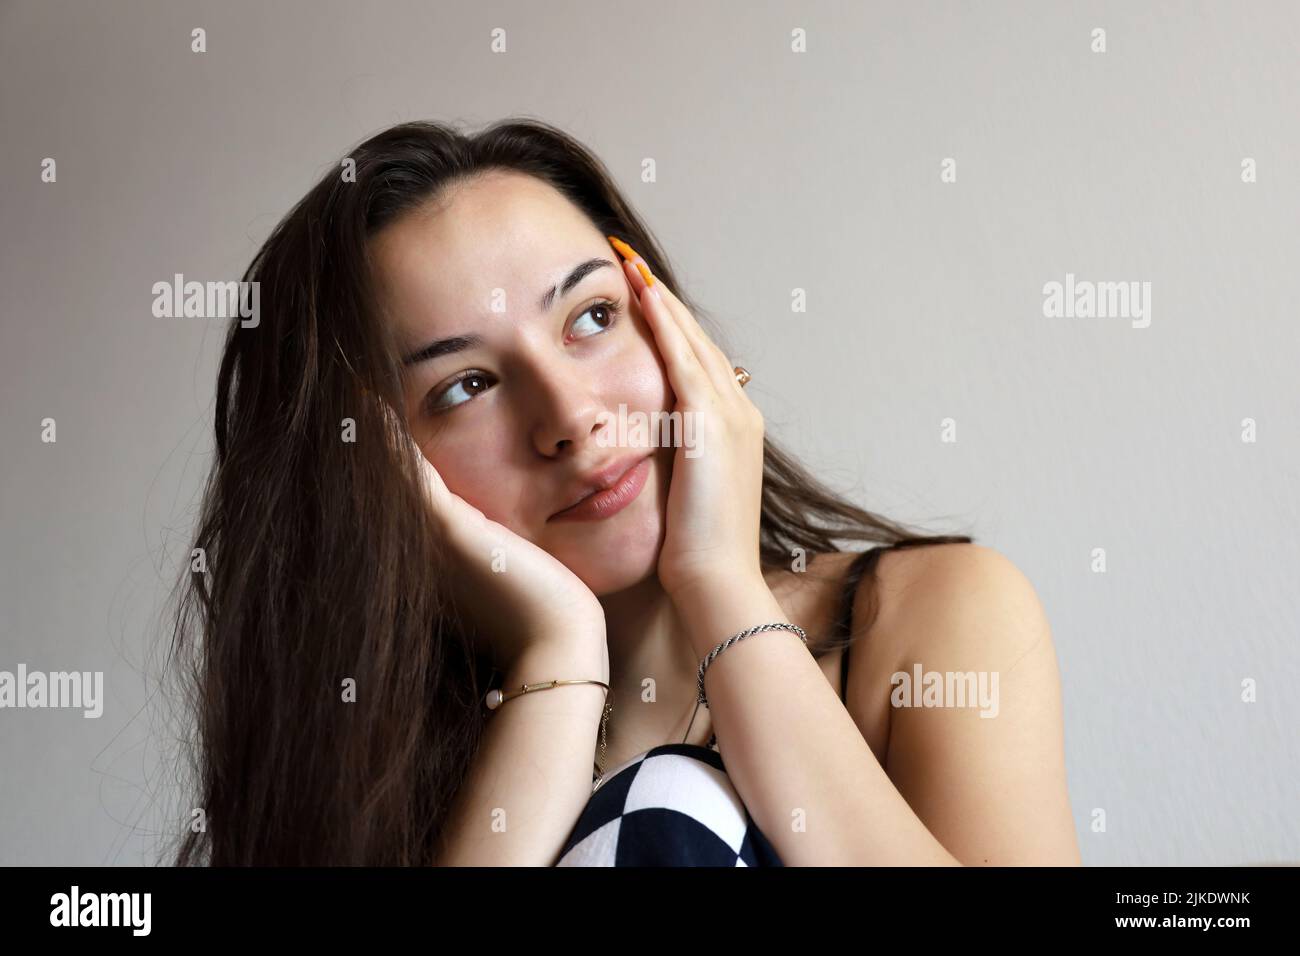 Portrait of attractive happy girl with long hair touching her face with her hands with orange acrylic nails. Concept of female beauty, dreamy mood Stock Photo